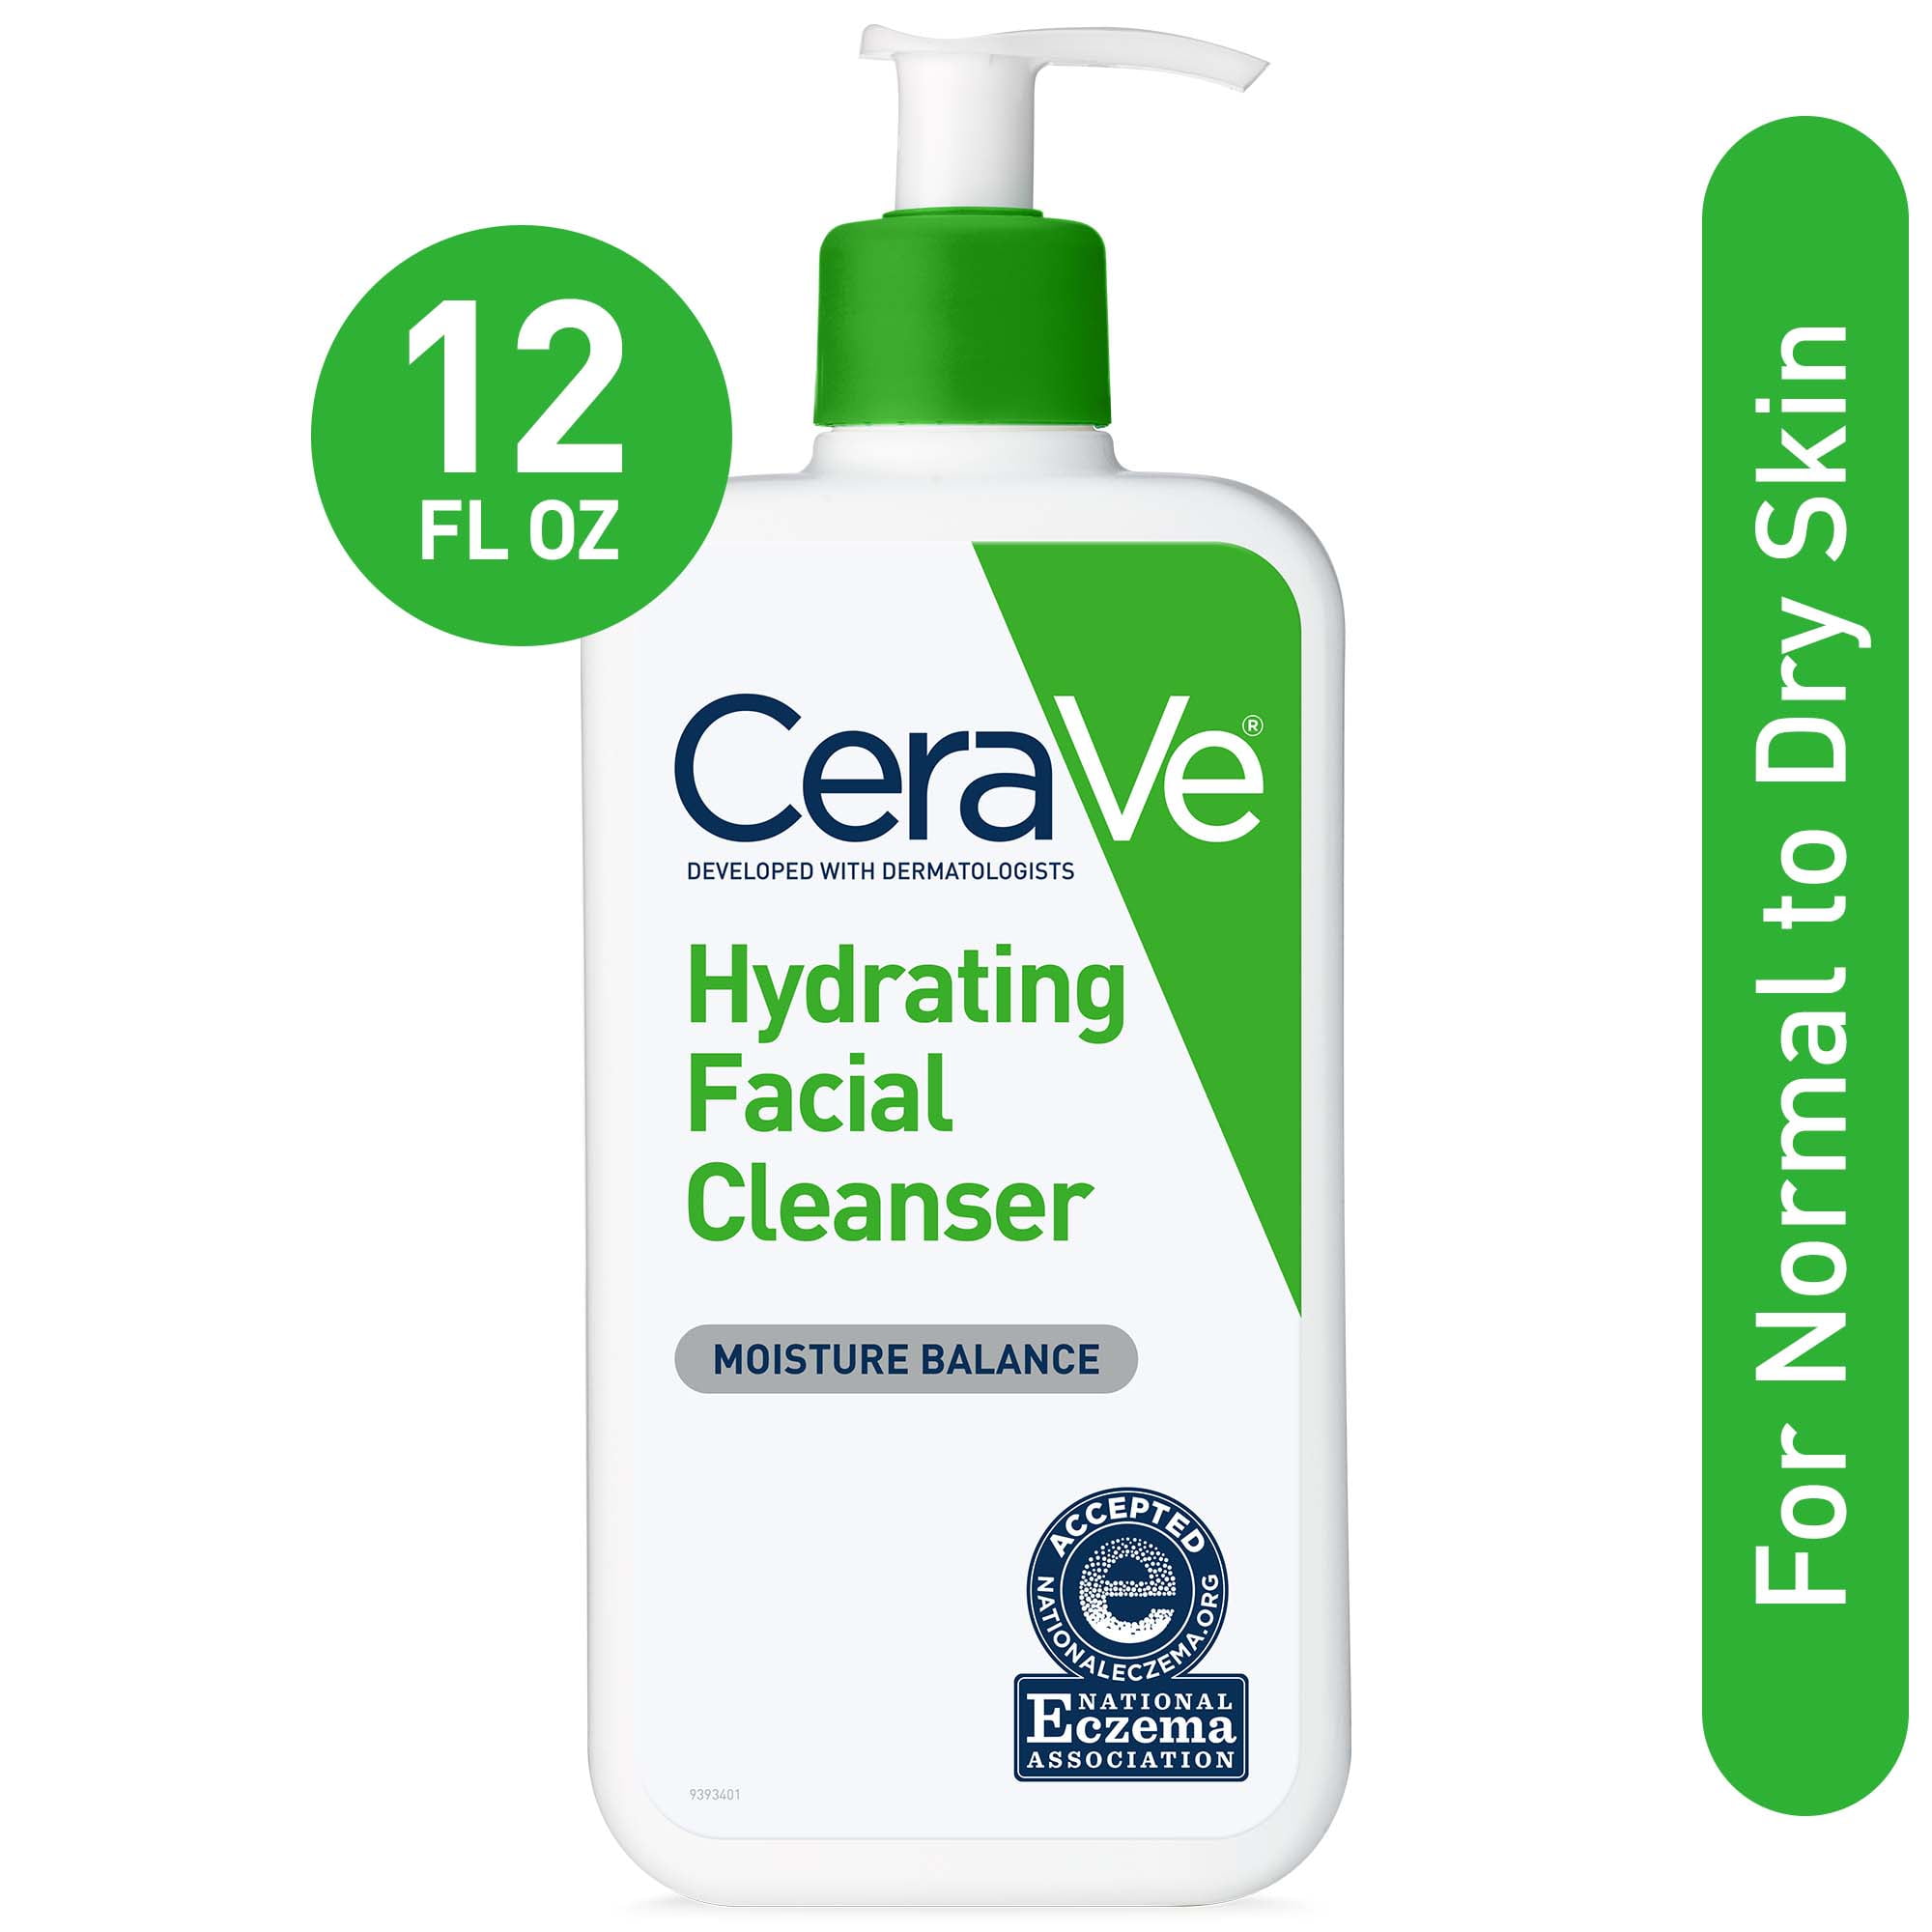 CeraVe Hydrating Facial Cleanser, Face Wash for Normal to Dry Skin, 12 fl oz